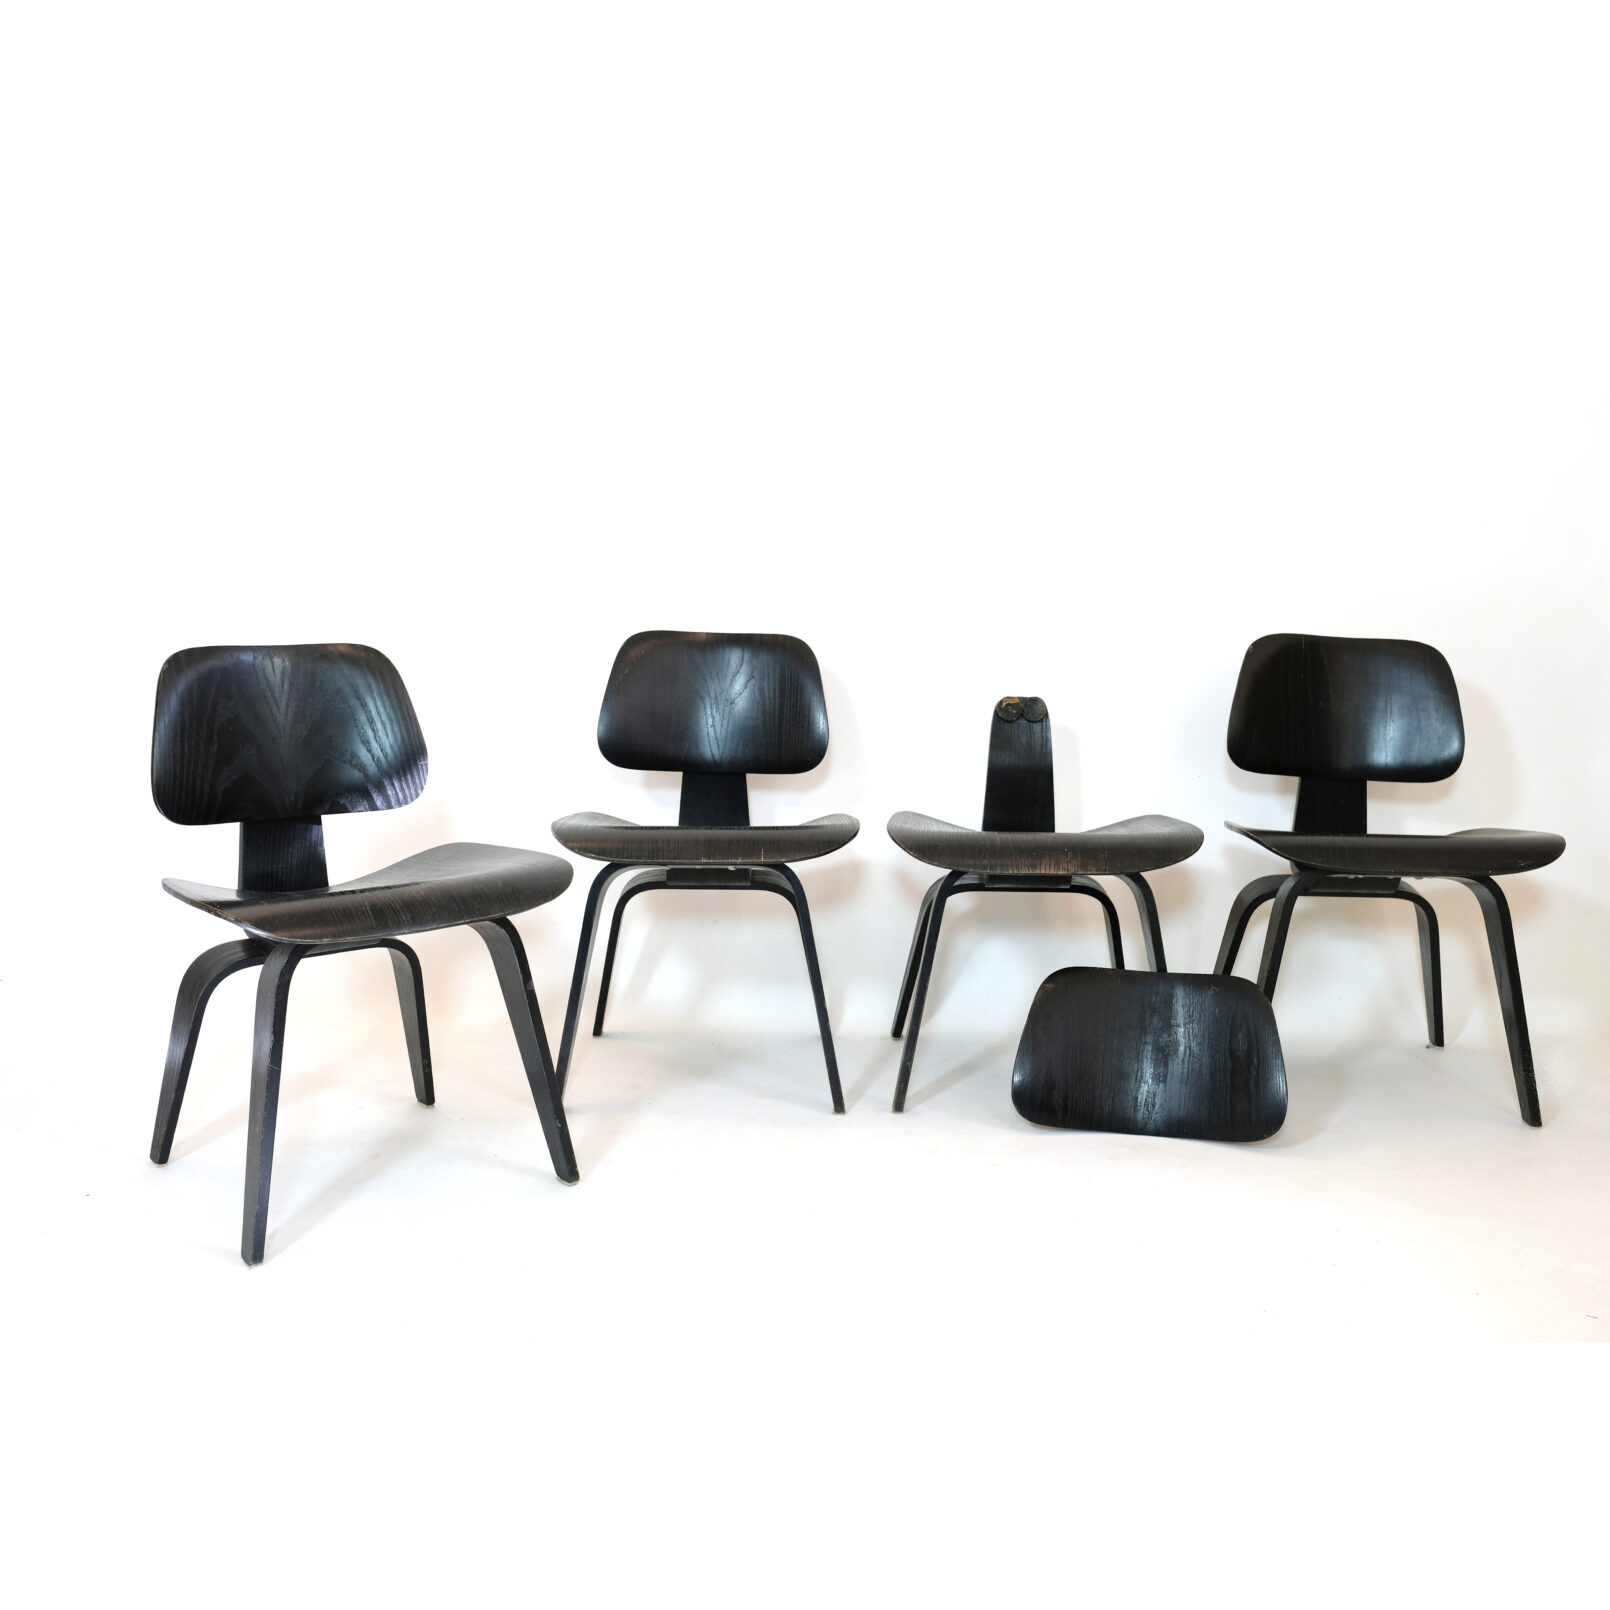 Charles and Ray Eames, set of 4 DCW chairs to be restored.